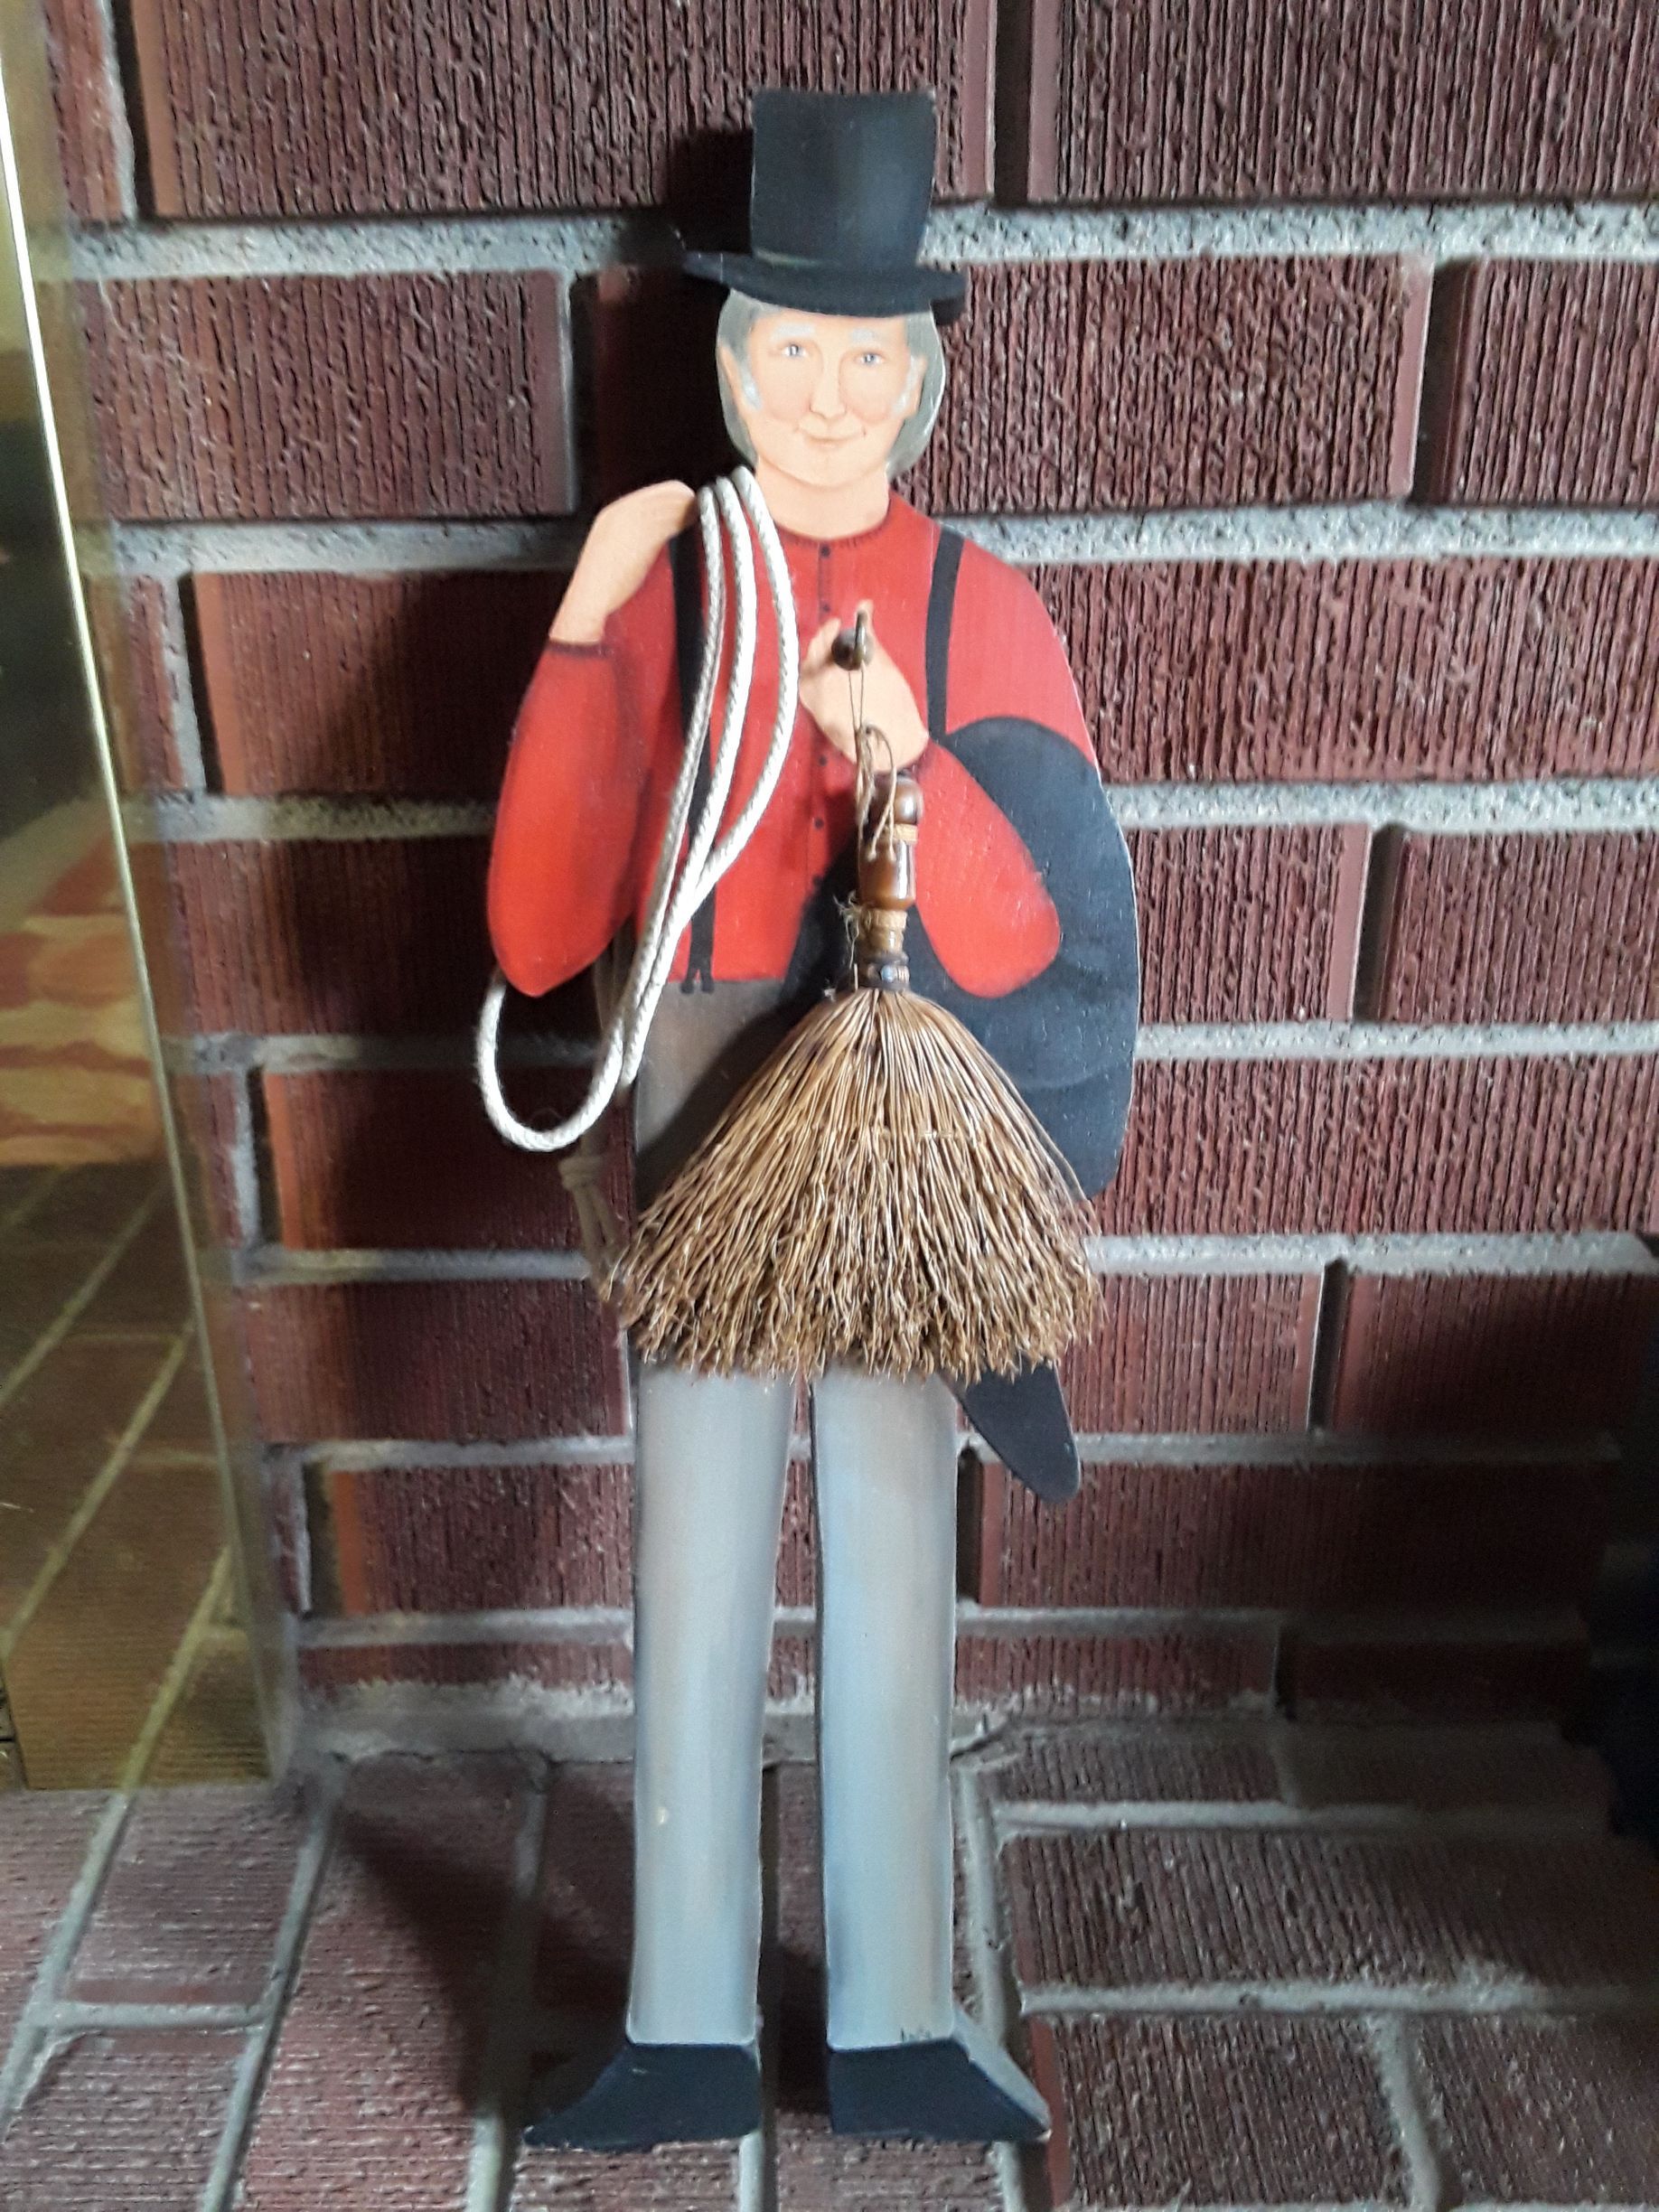 A decoration of a chimney sweep who does wood-burning stove installation in Greeley, CO